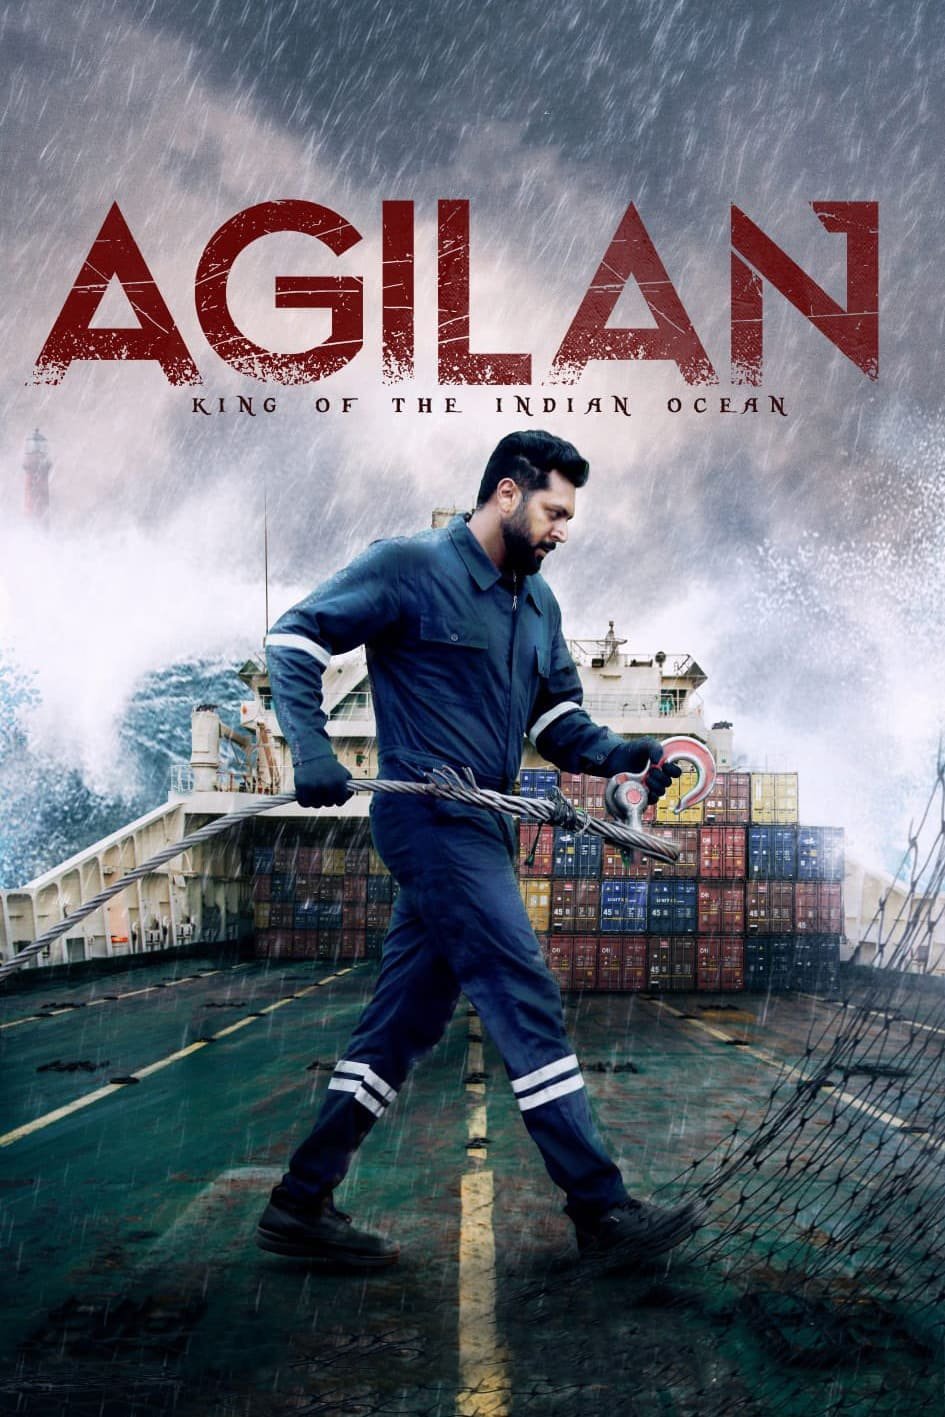 Poster for the movie "Agilan"